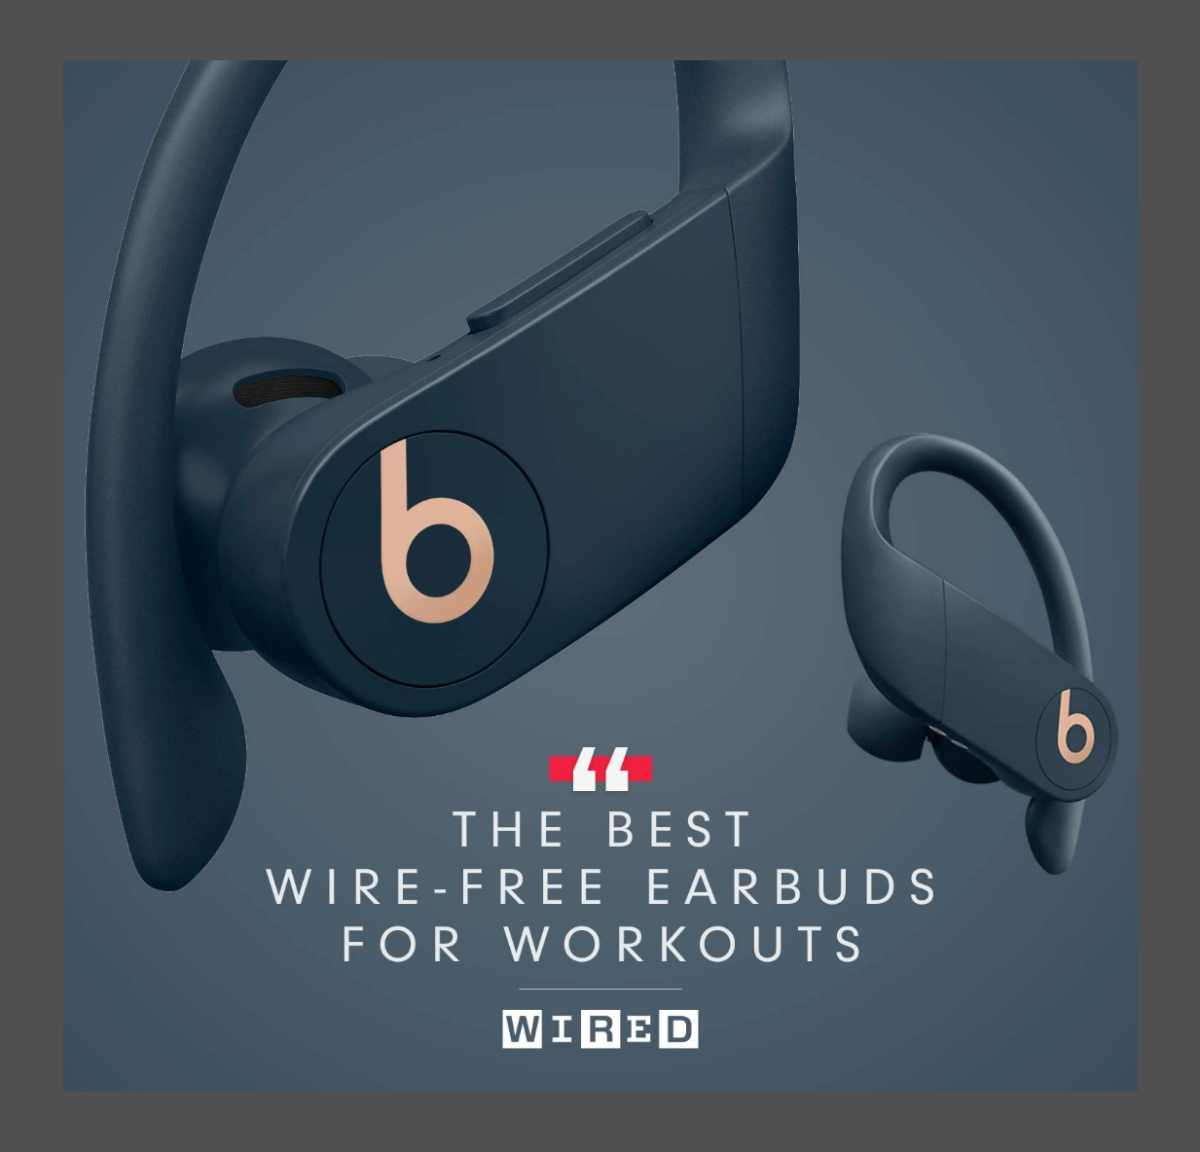 A pair of Beats Powerbeats Pro with  Wired Award for Best Wire-Free Earbuds for Workouts